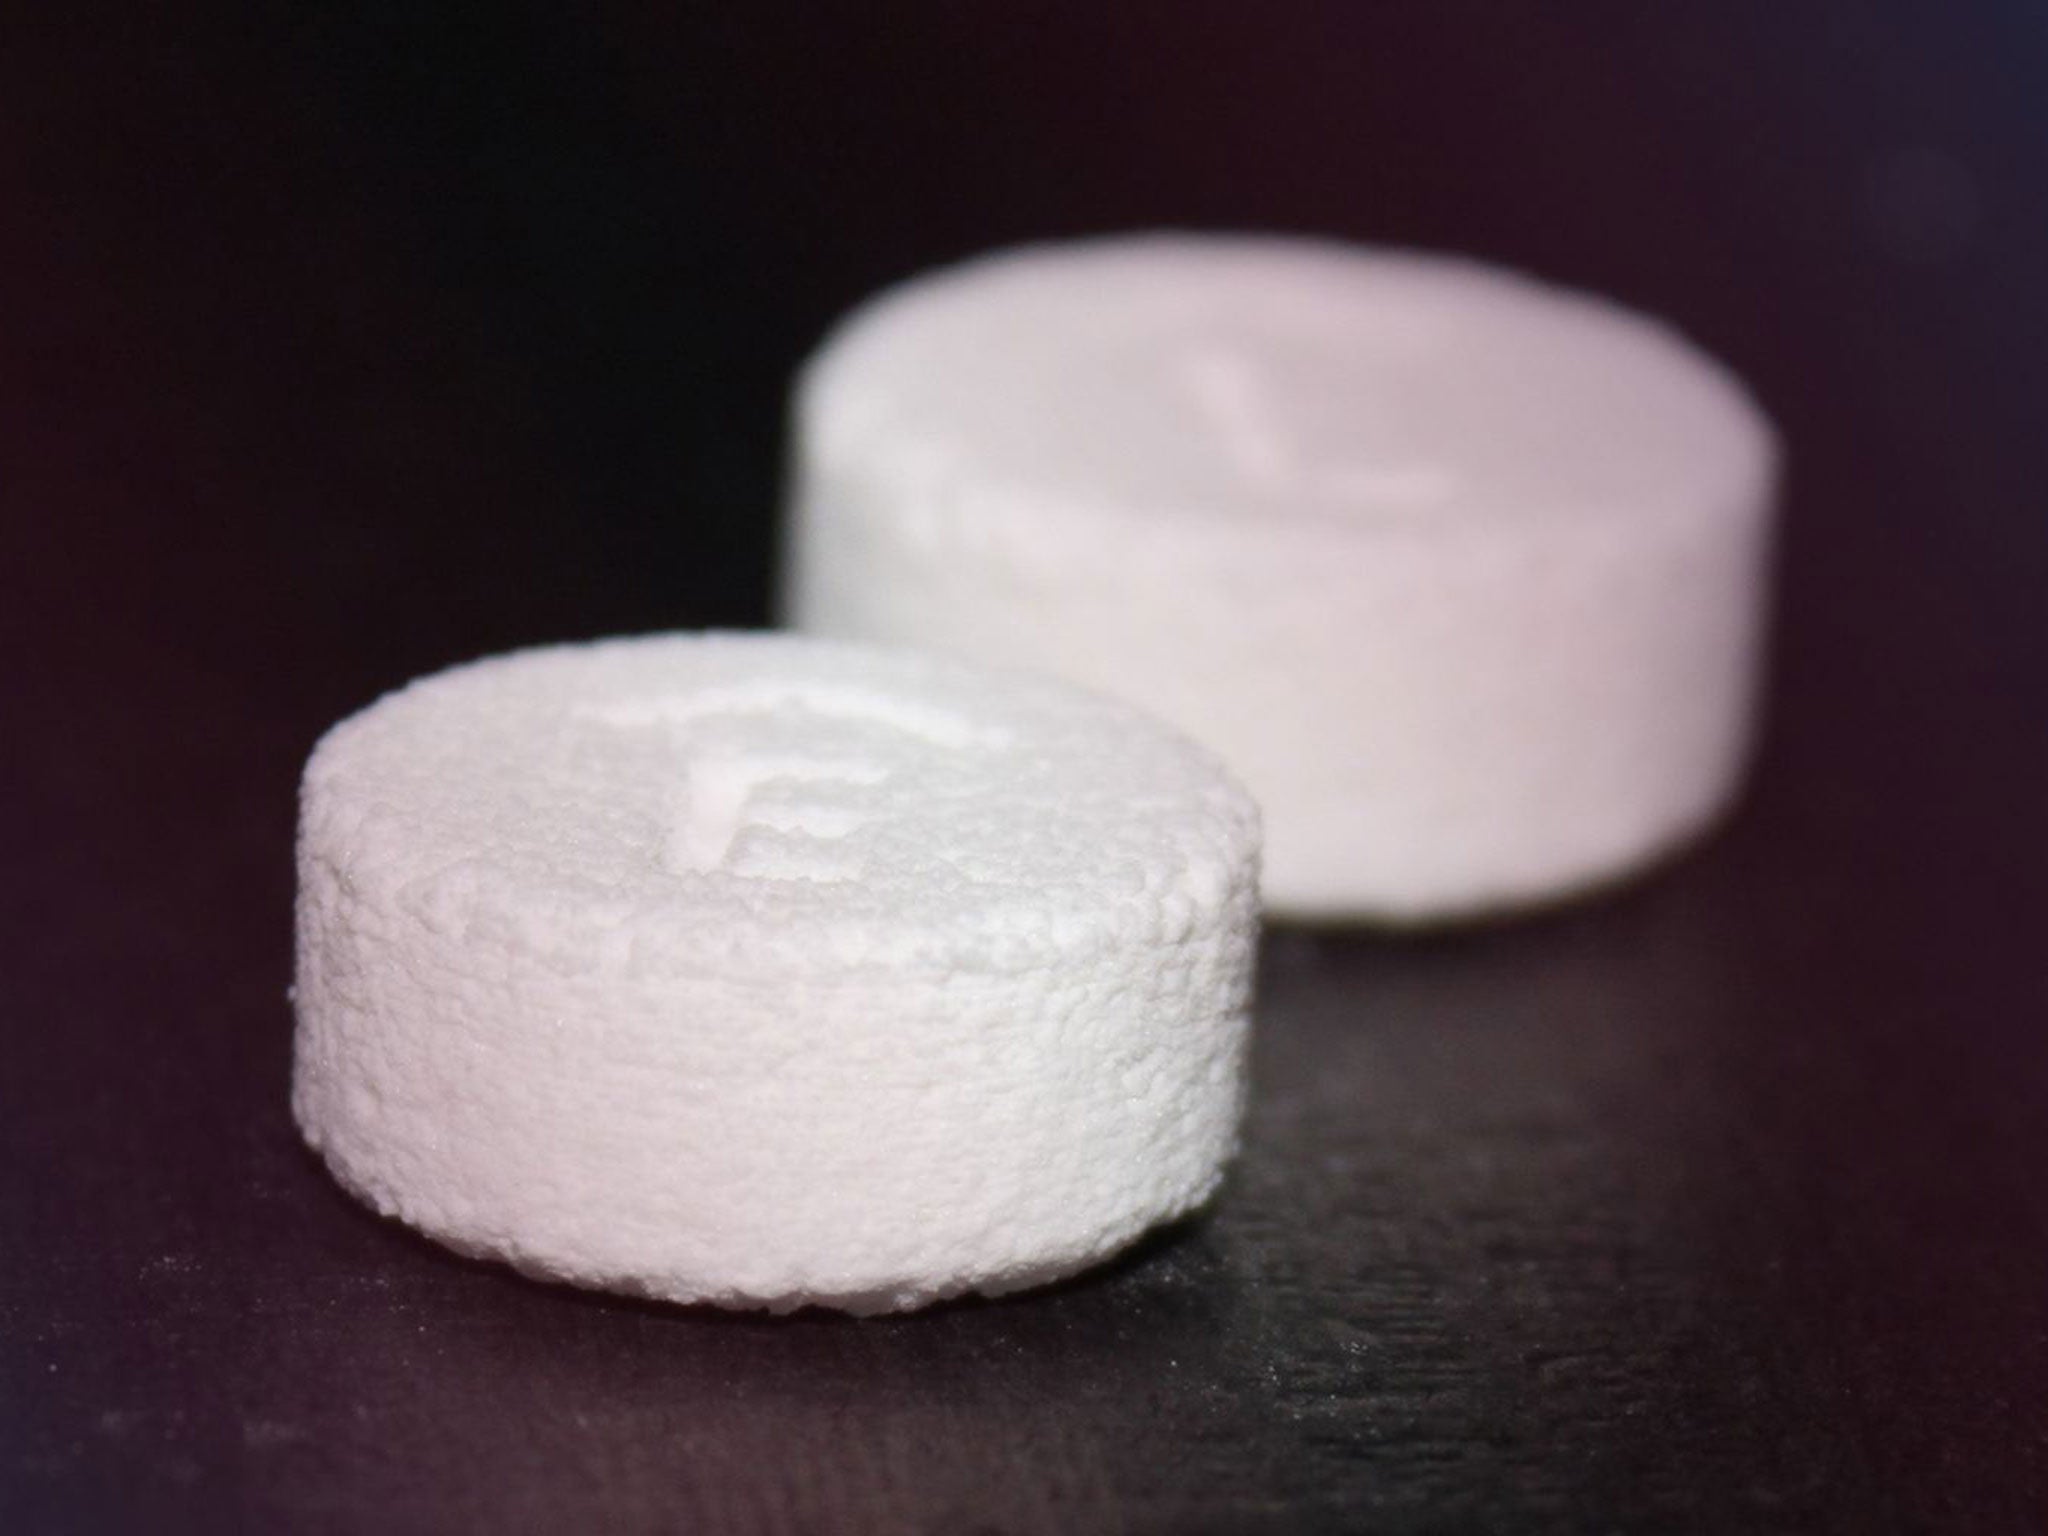 The 3D printed pill